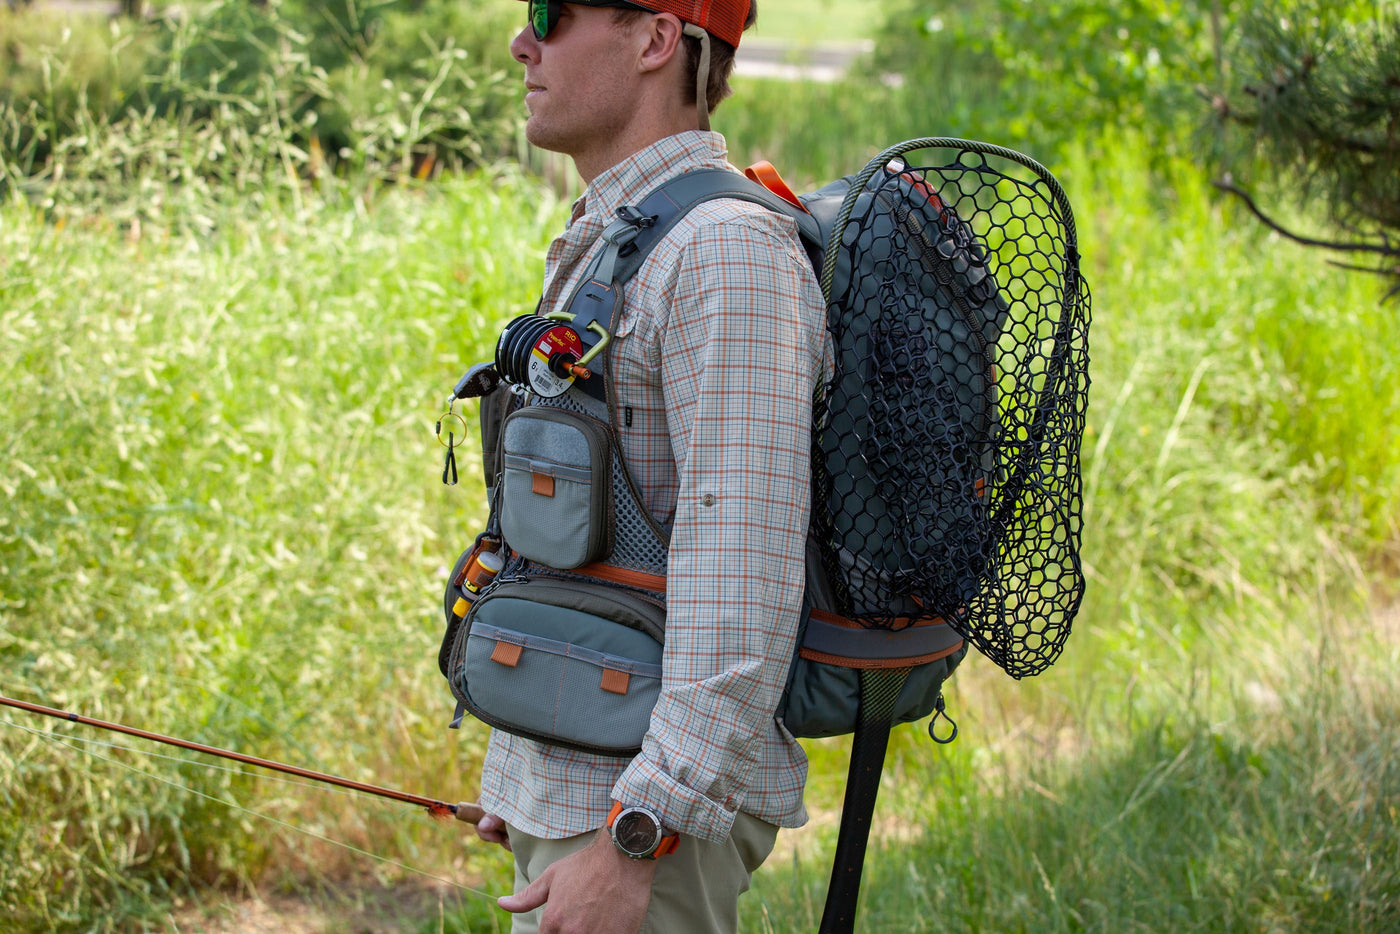 Top Quality Fly Fishing Vest and Mesh